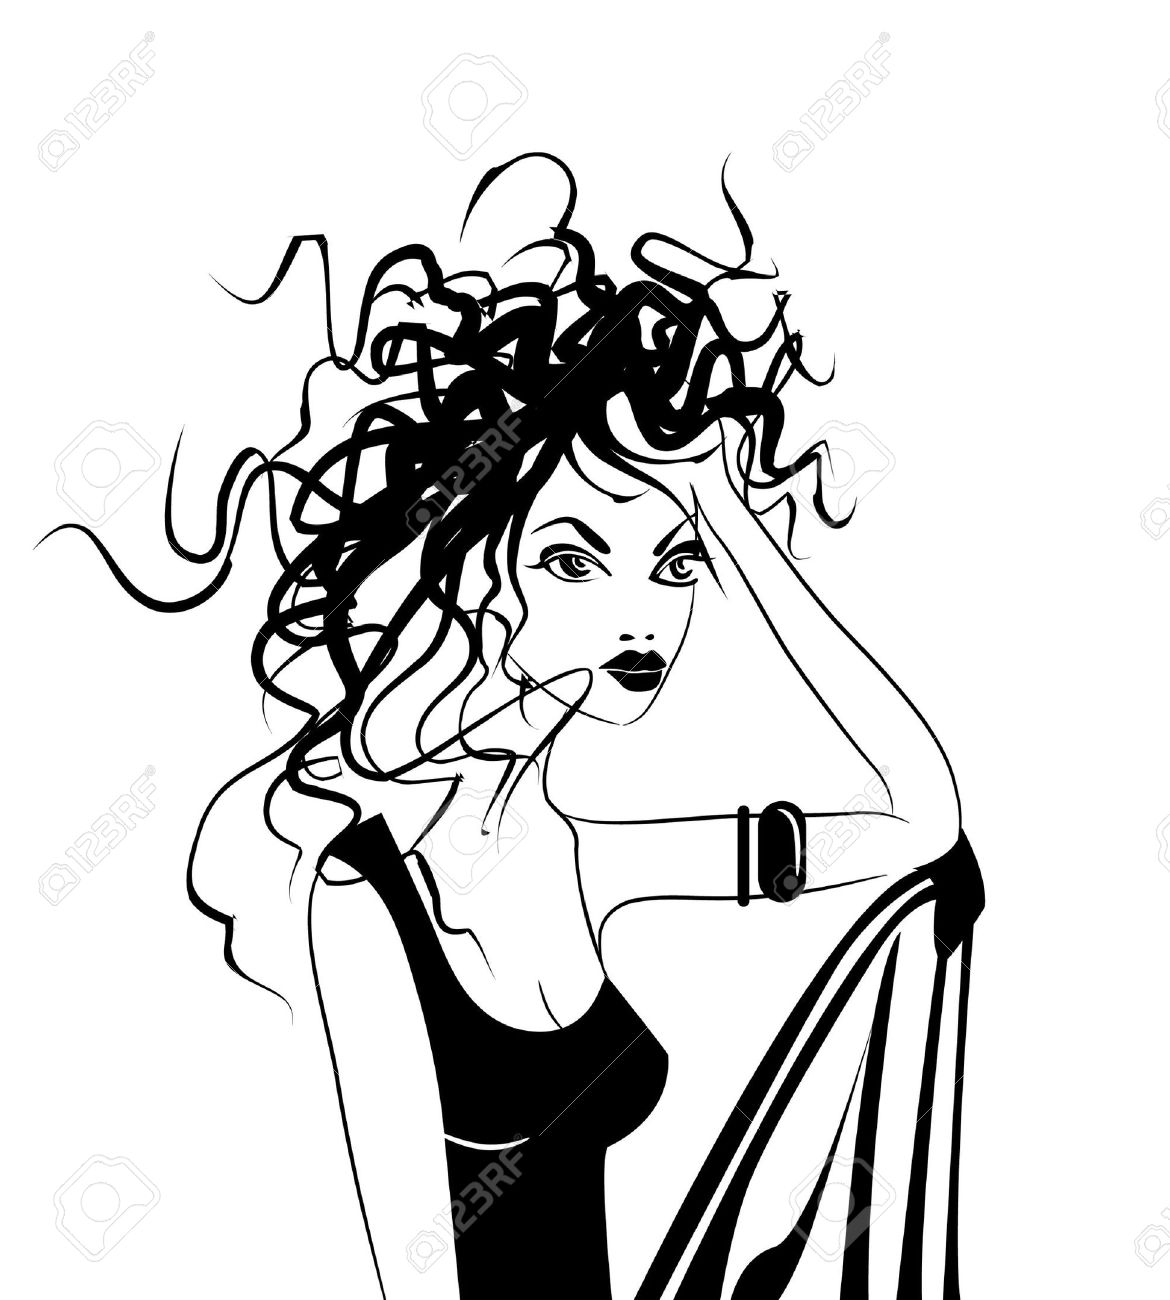 Woman With Messy Hair Vector Clipart.